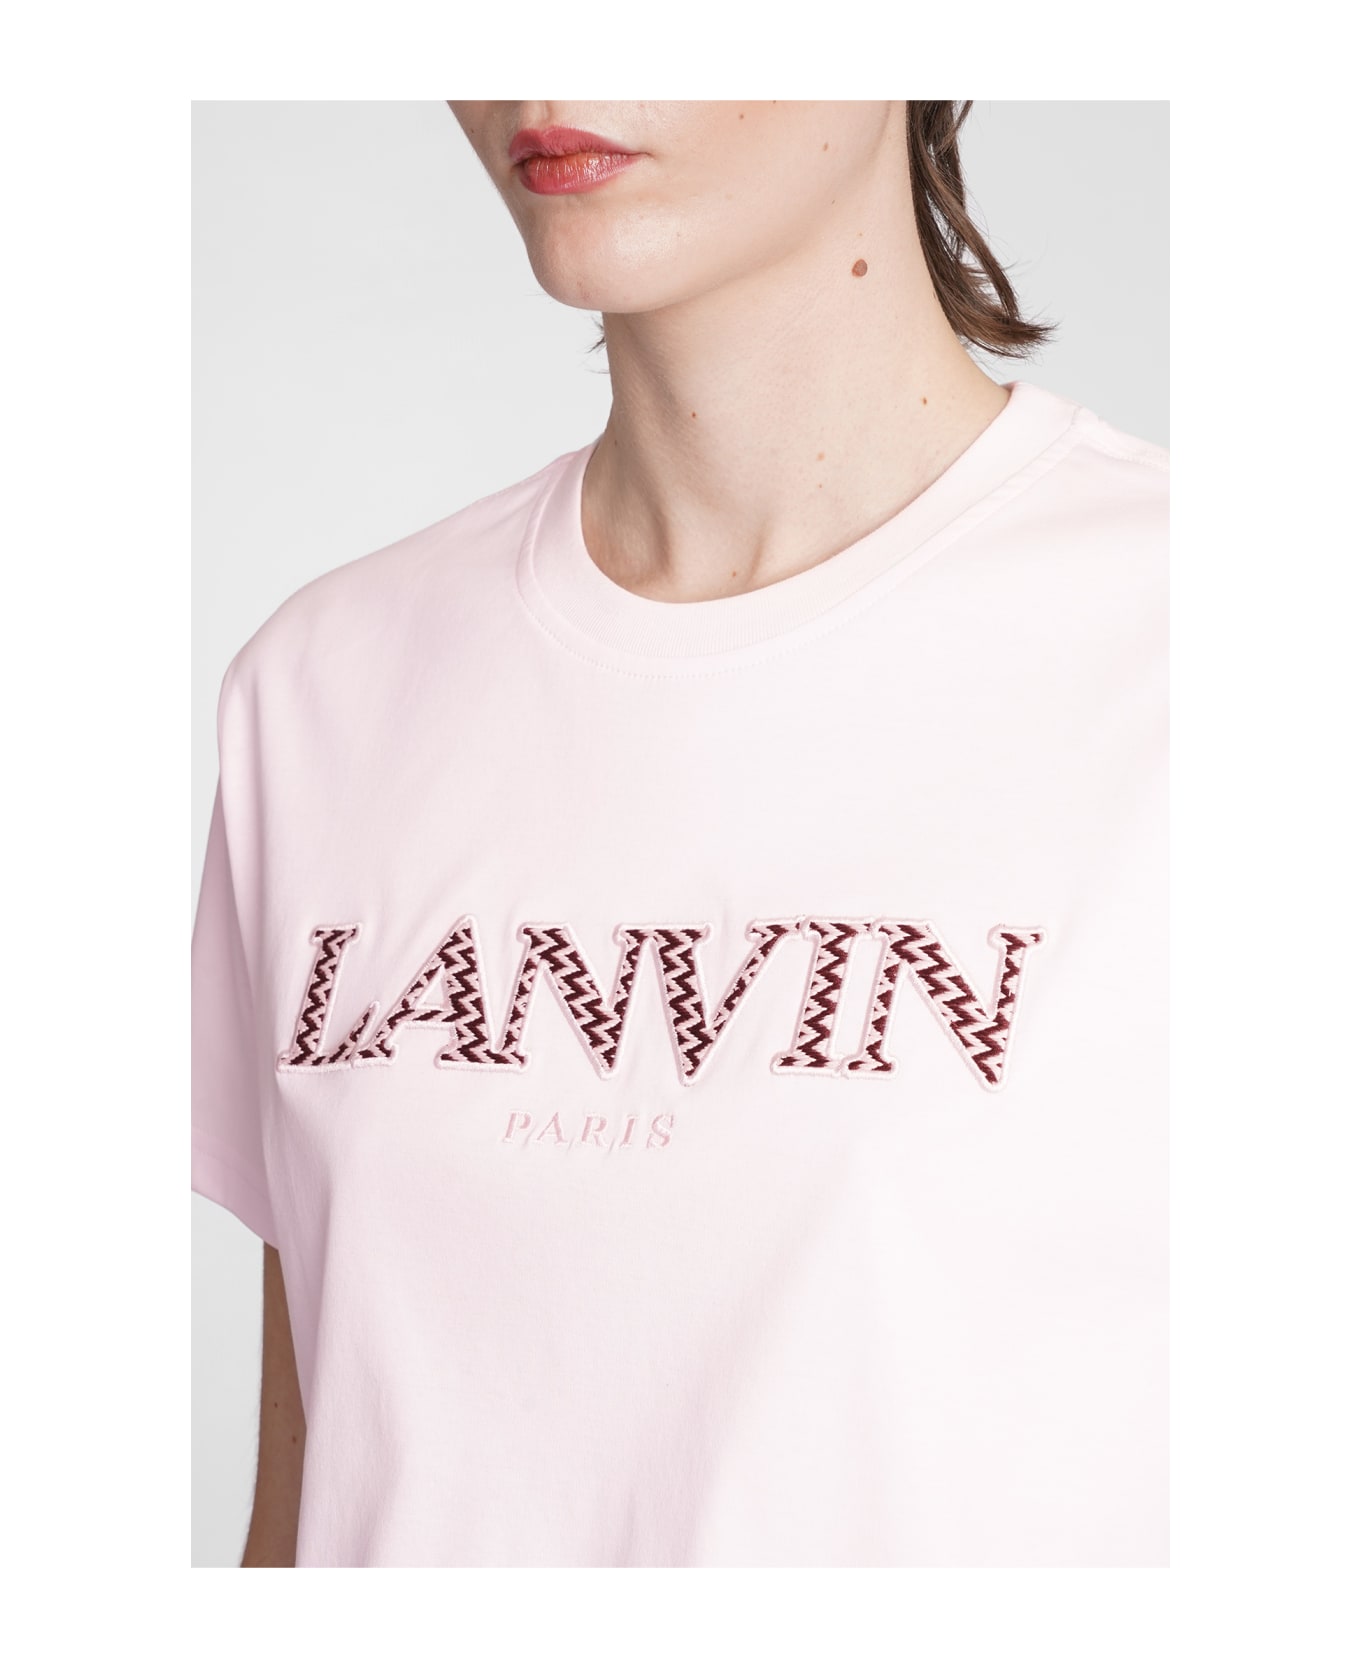 Lanvin T-shirt In Rose-pink Cotton - Pink Tシャツ